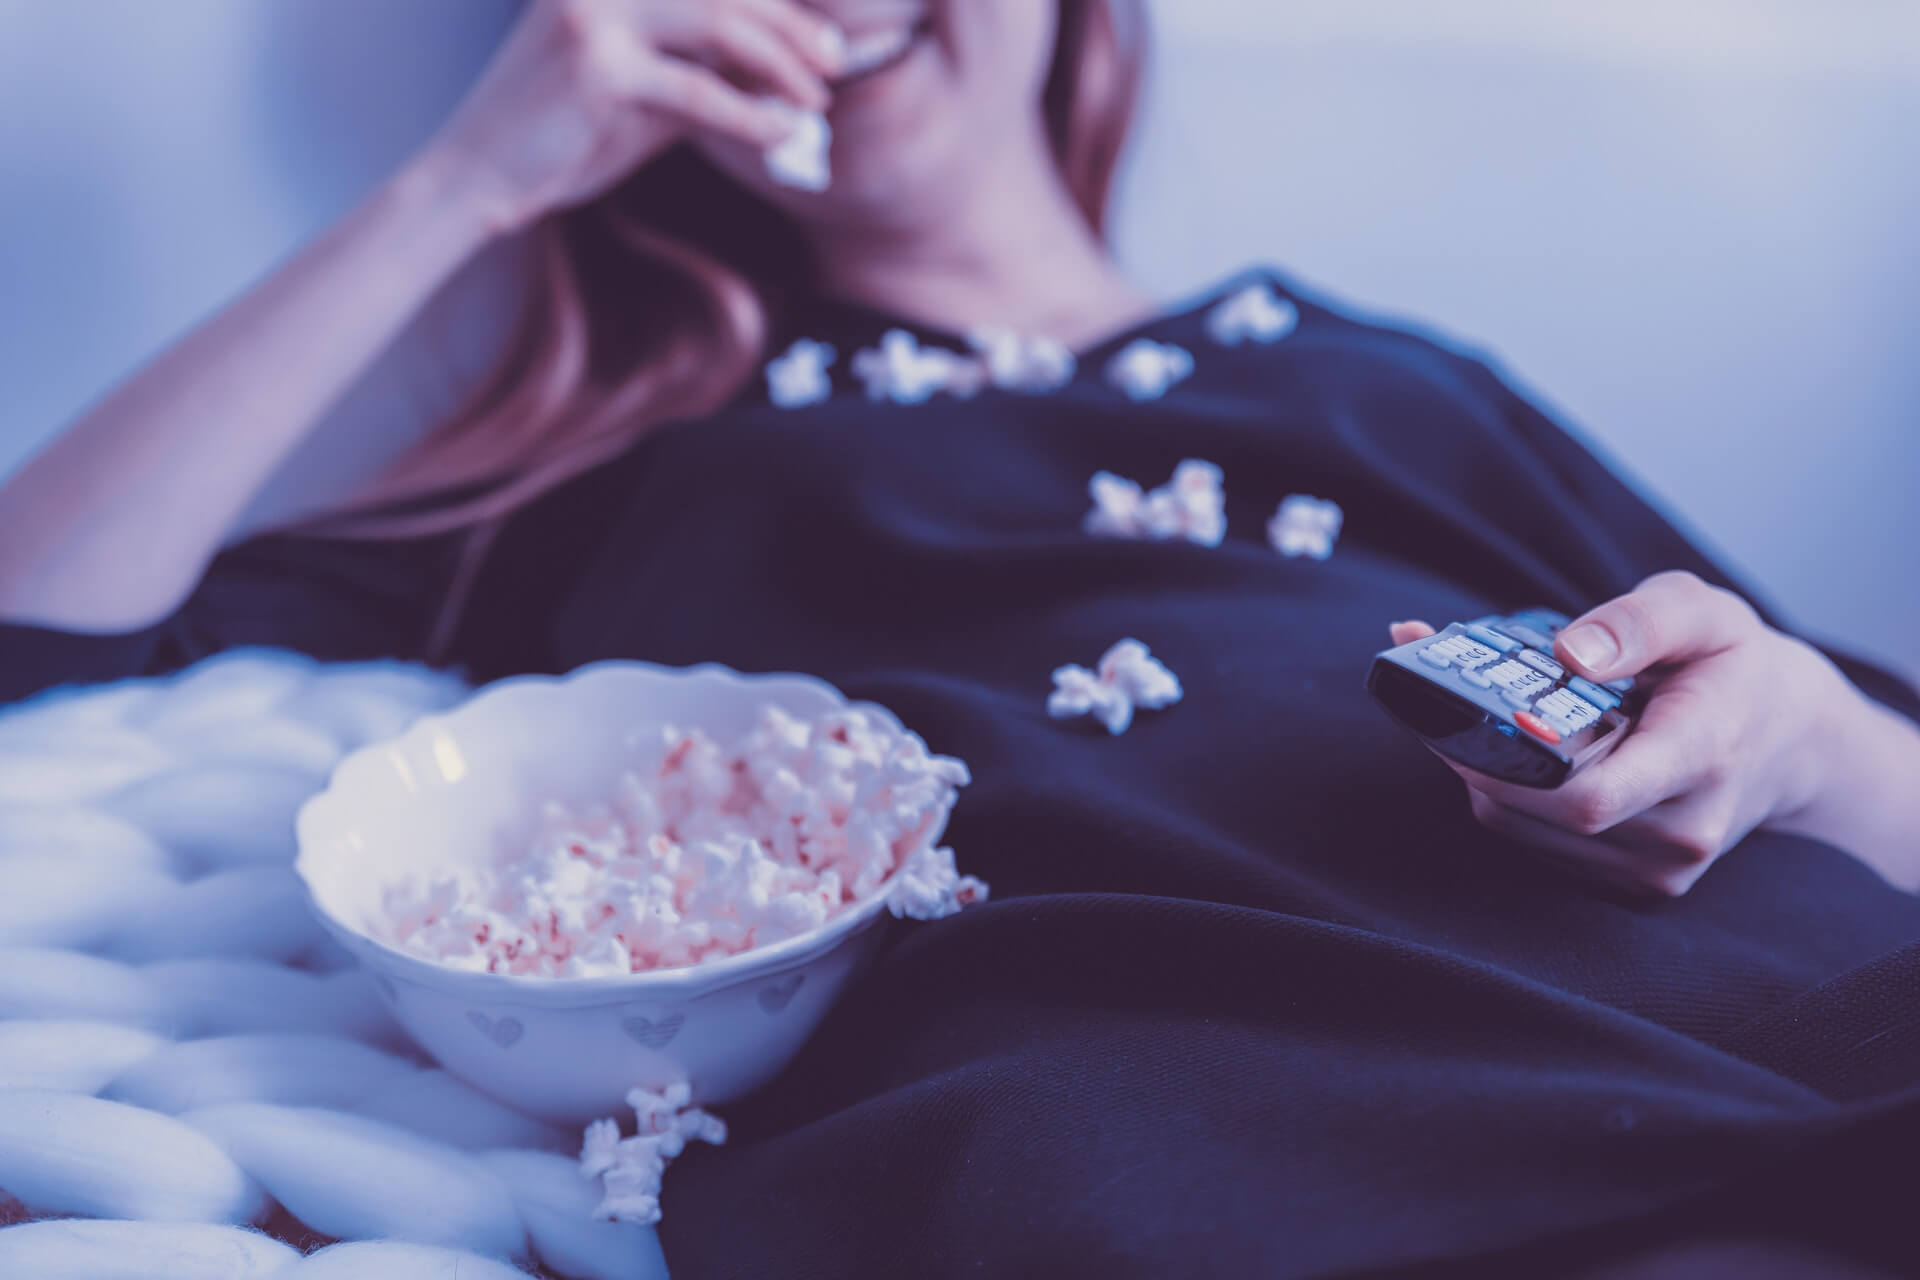 woman eating popcorn in front of television advertising